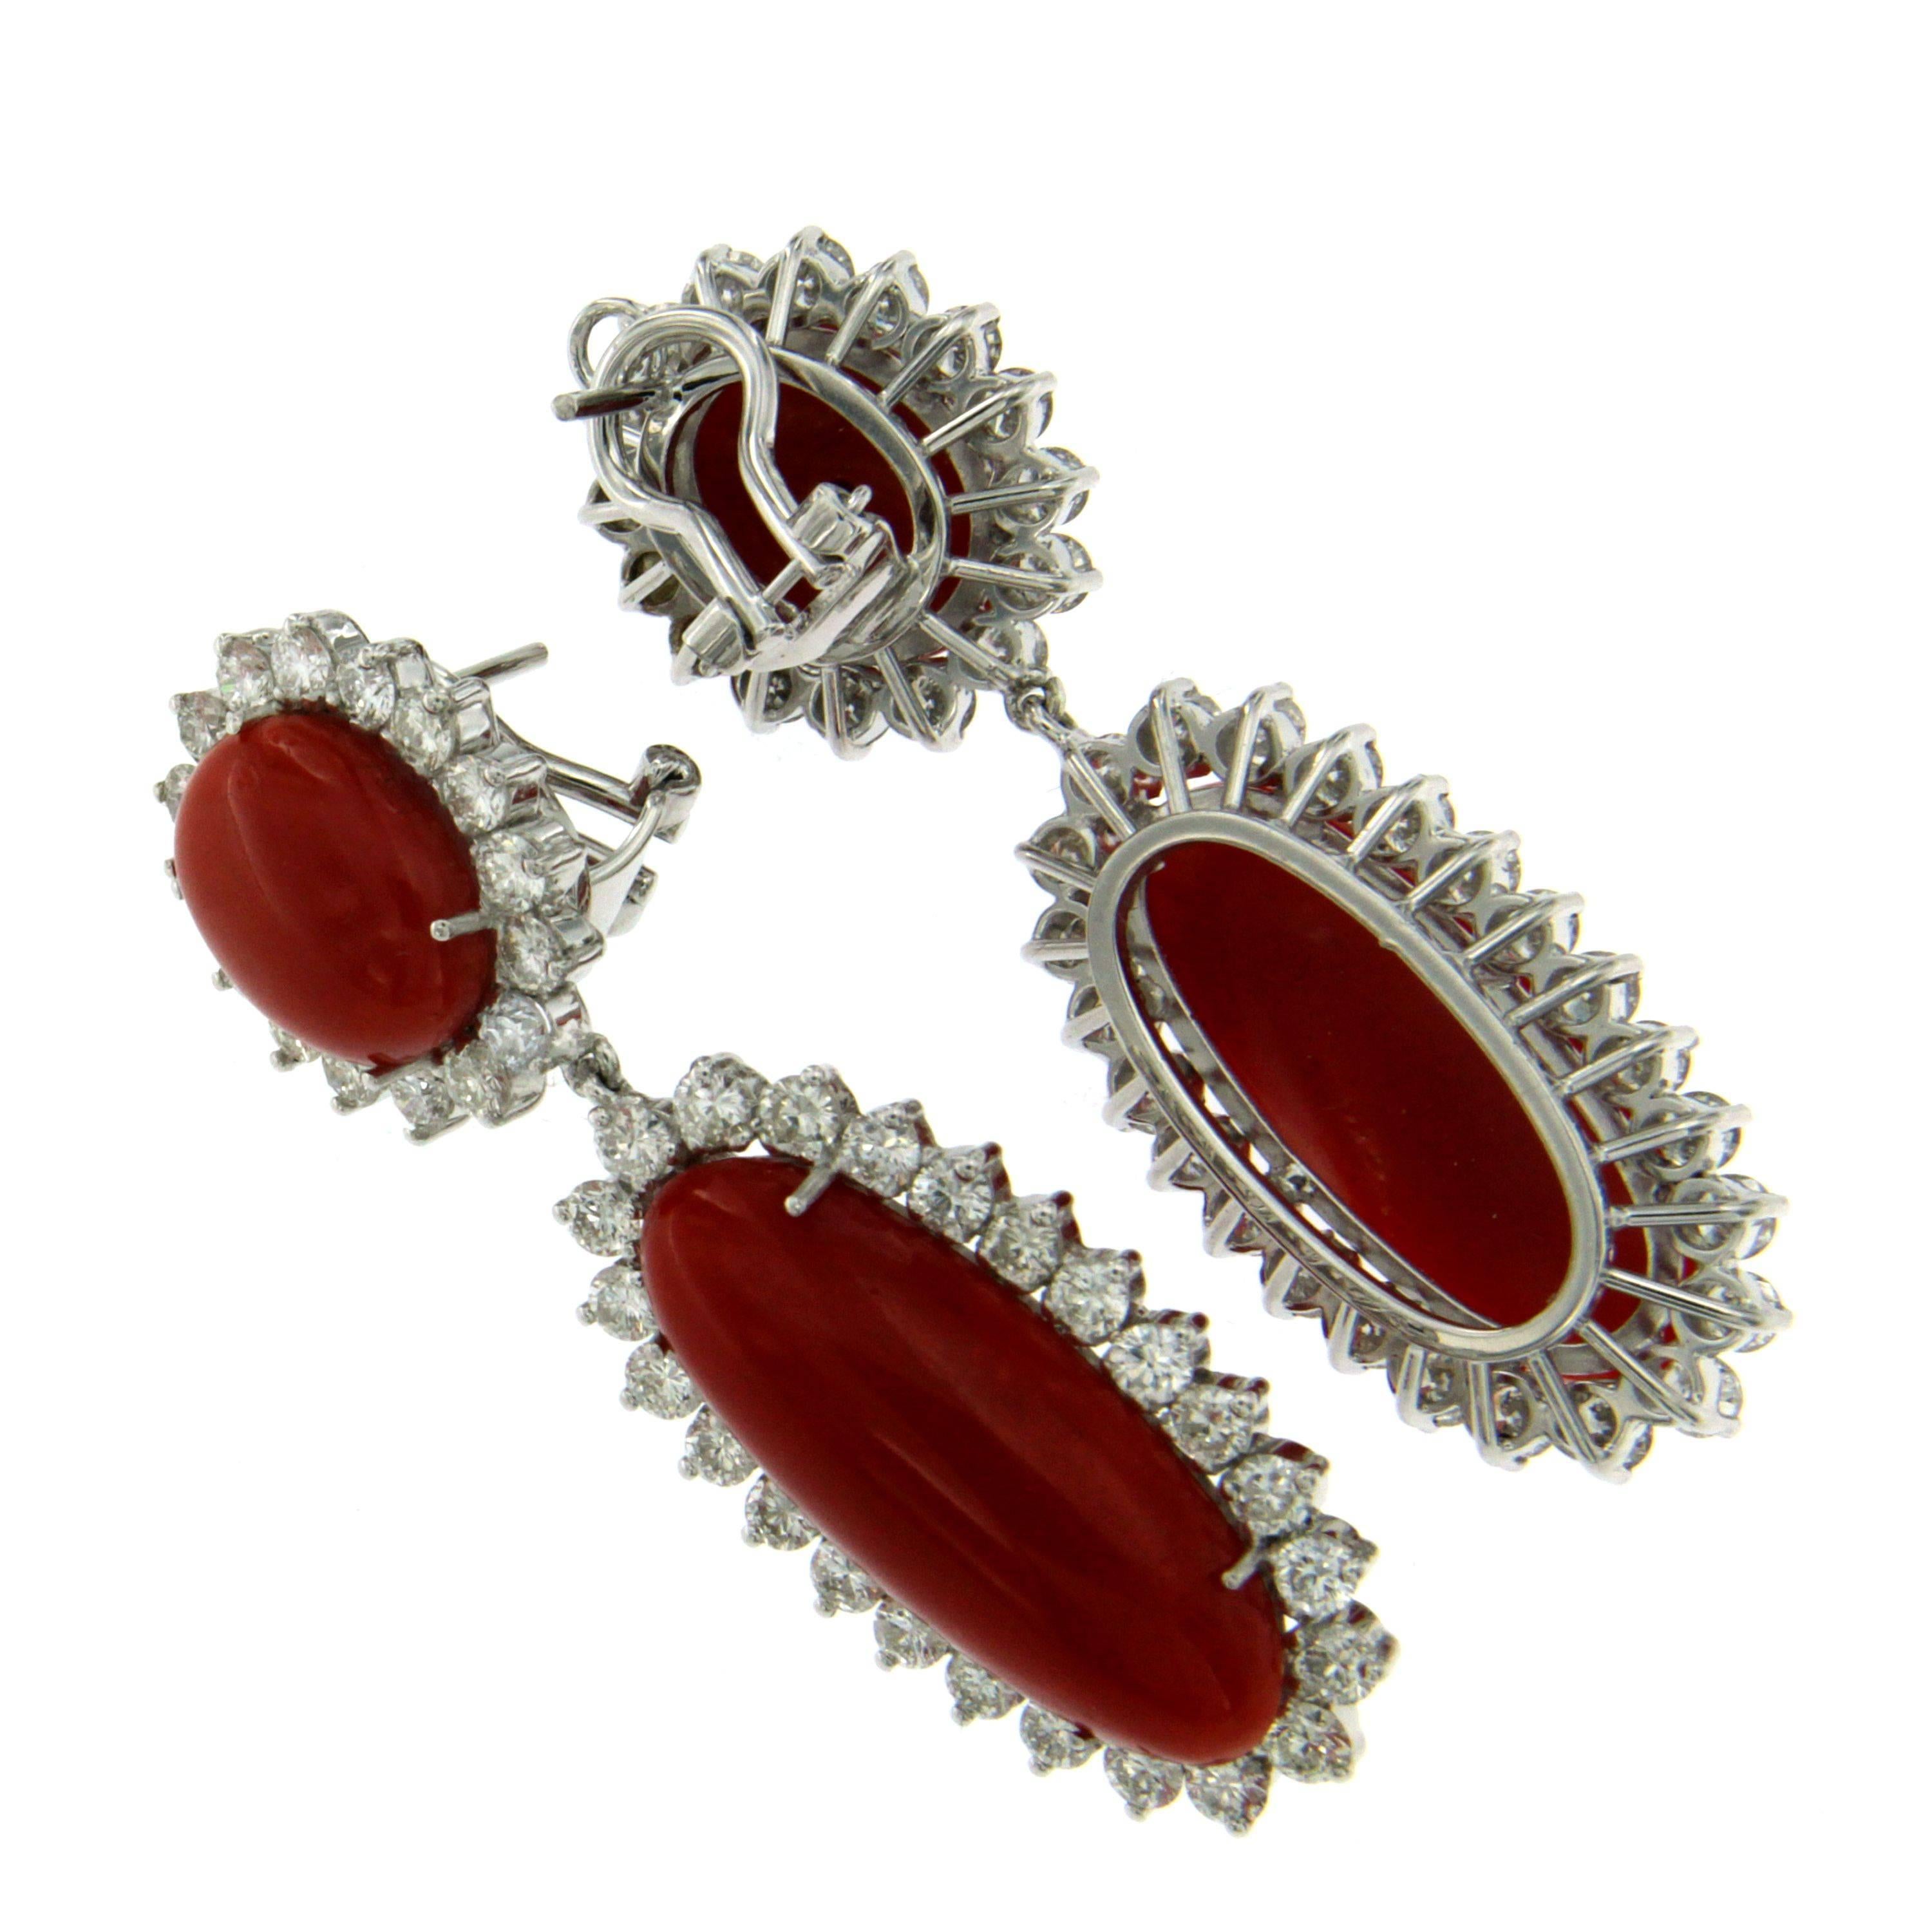 Fabulous pair of Dangle Drop earrings each of them set with 2 Aka Japanese Coral measuring approx. 25.2 x 11.5 mm; 12.4 x 9.9 mm; surrounded by 40 round brilliant cut Diamonds approx 2.83 cts G color VVs. Circa 1970

CONDITION: Pre-owned - Excellent